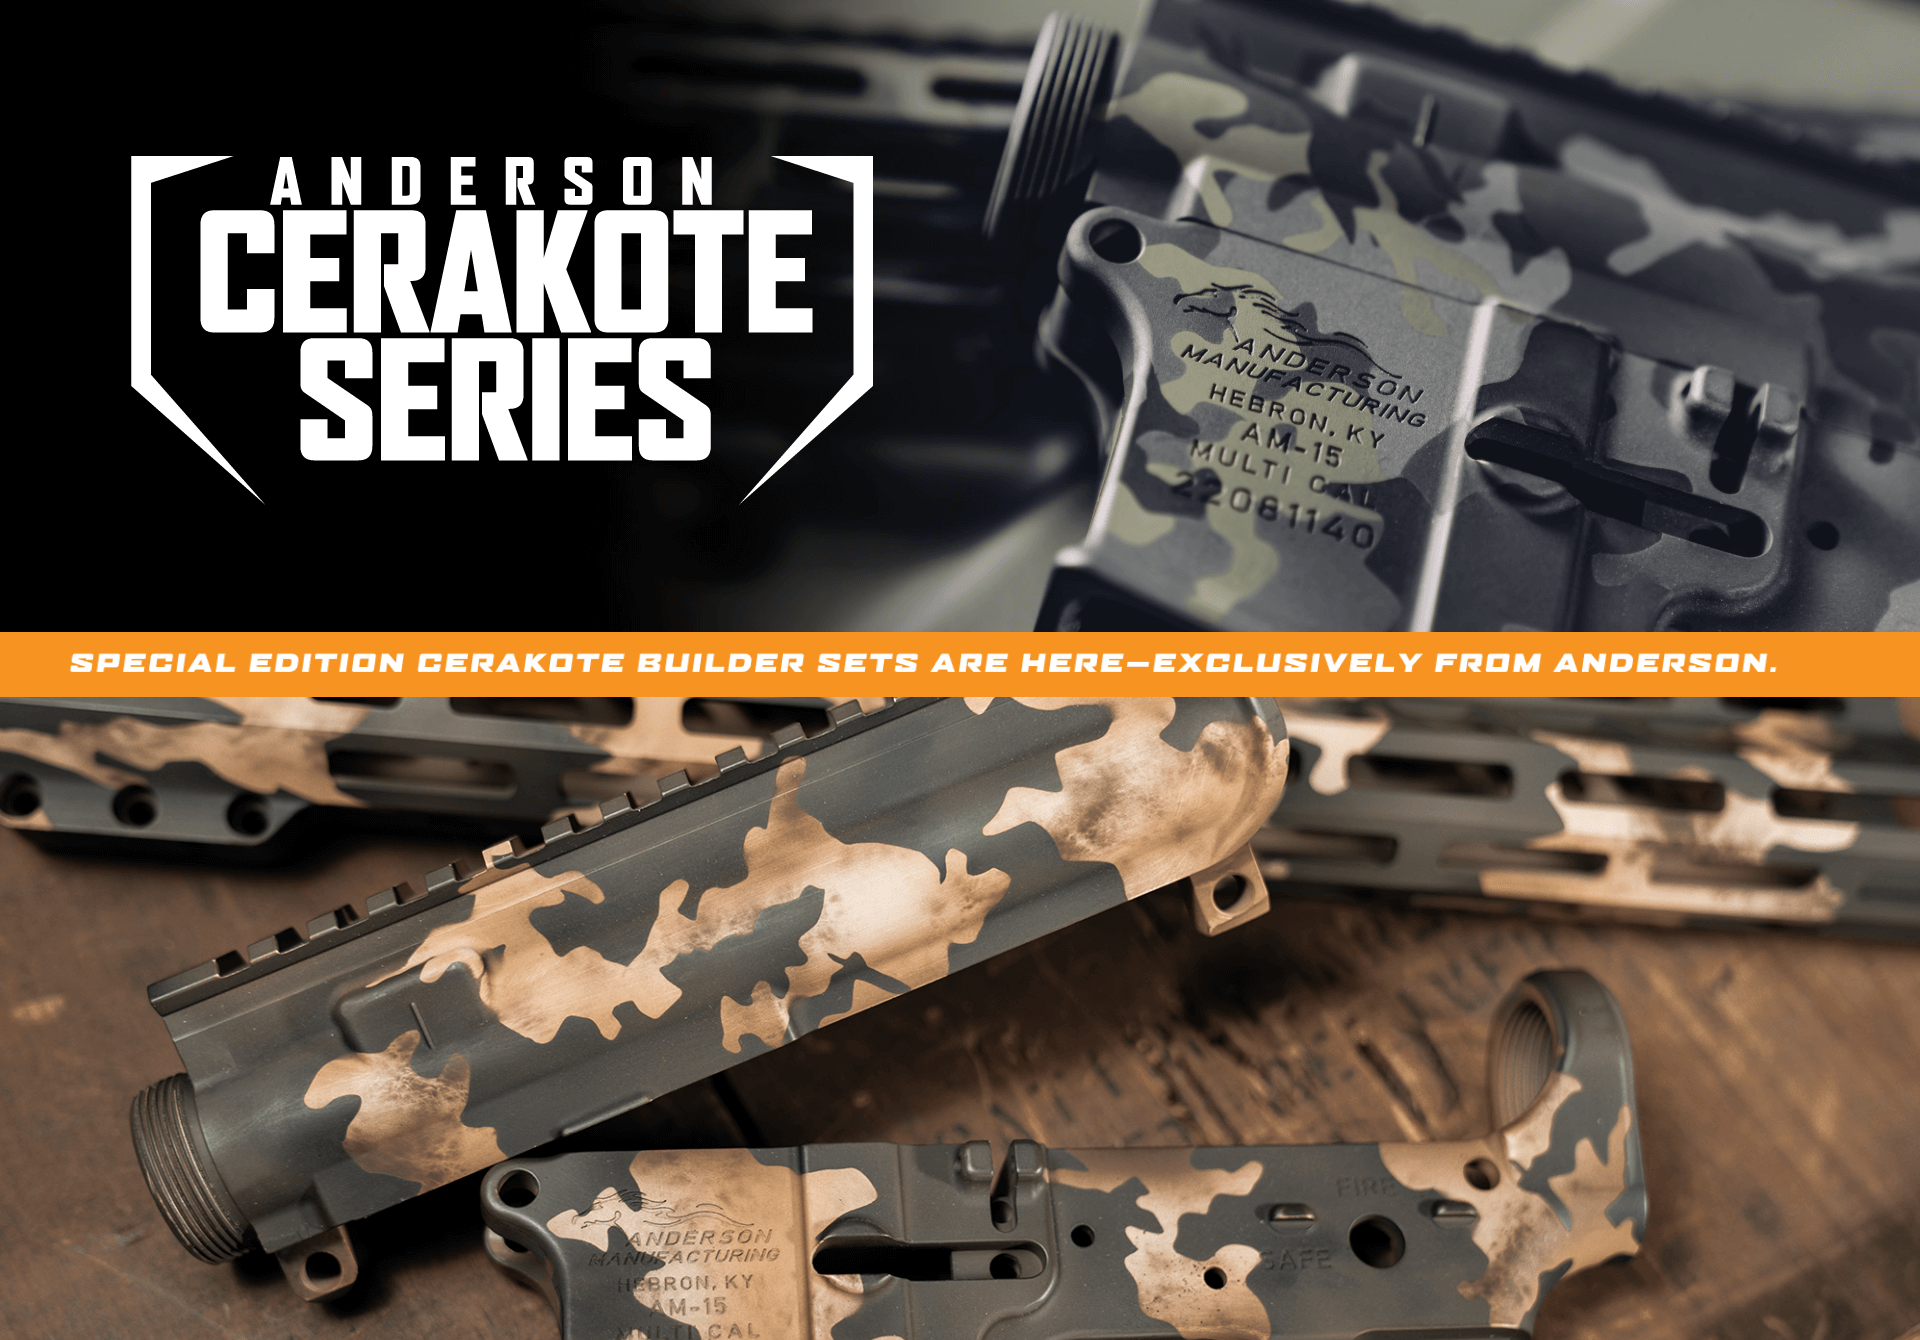 Special Edition Cerakote Builder Sets Are Here—Exclusively From Anderson.